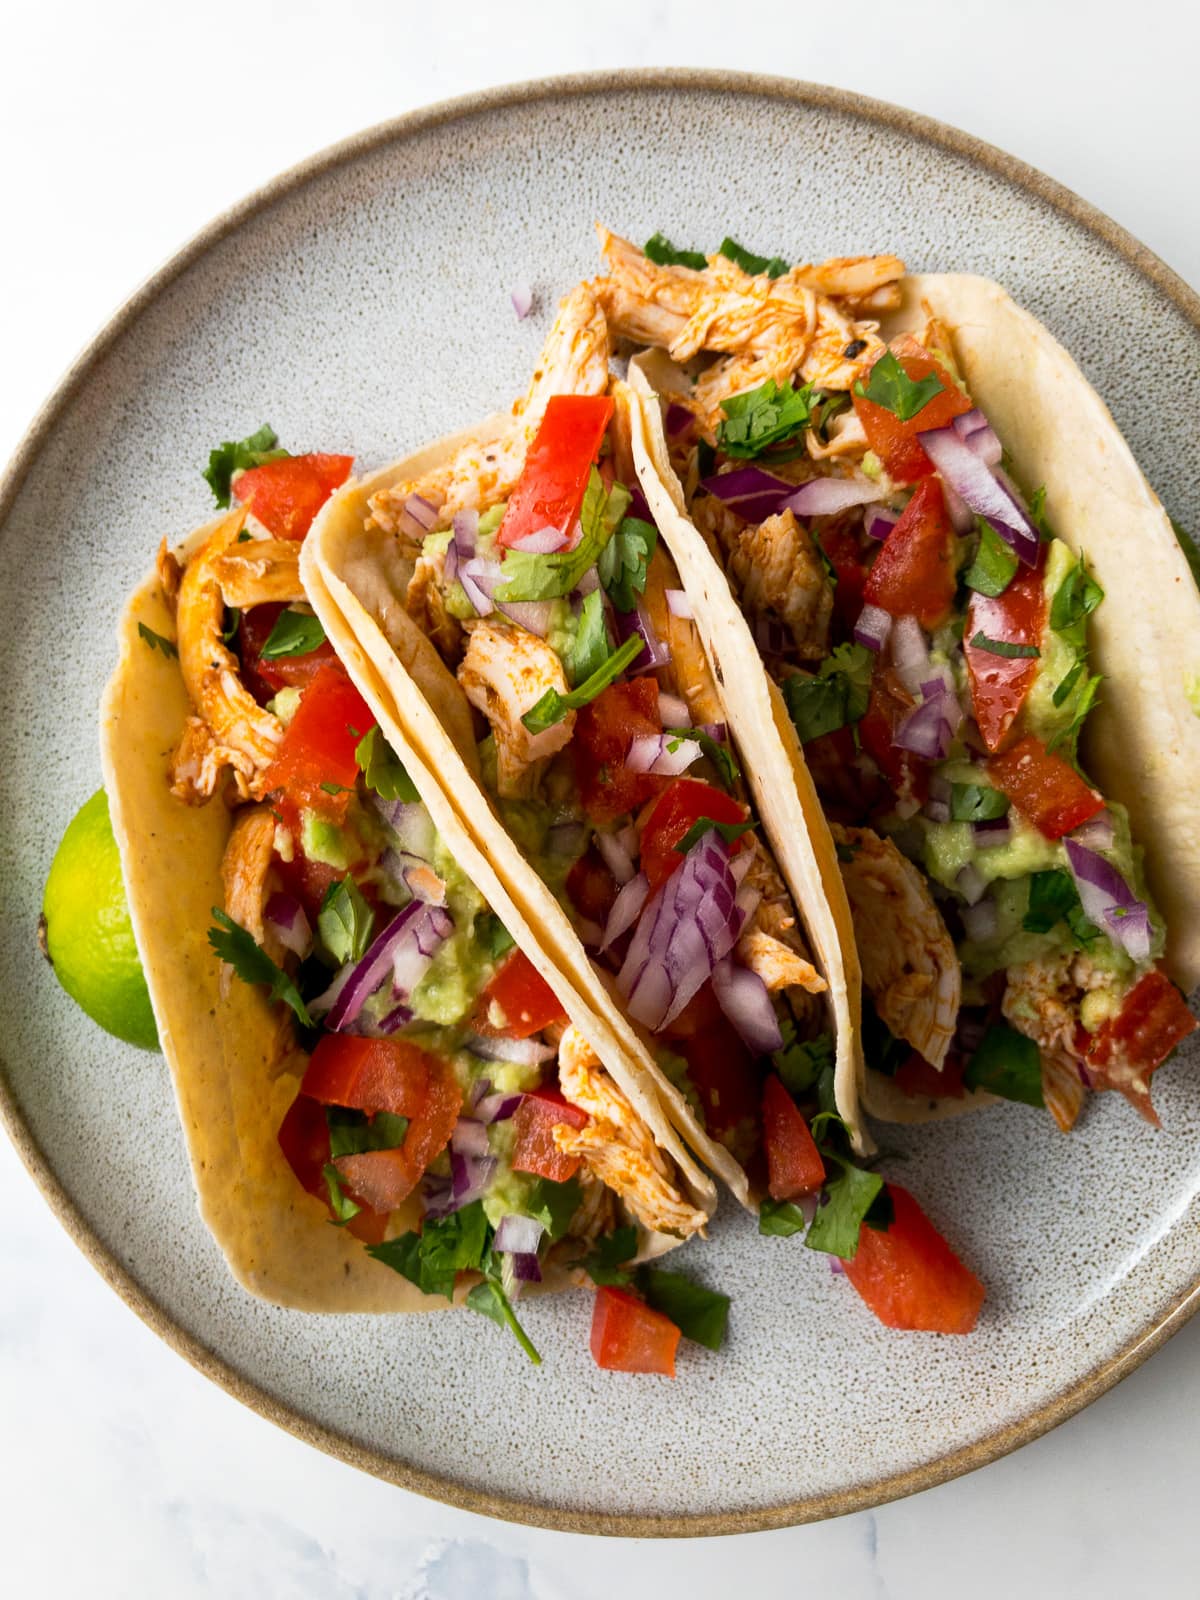 shredded chicken tacos topped with avocado, tomatoes, red onion, and cilantro on a plate with lime wedges